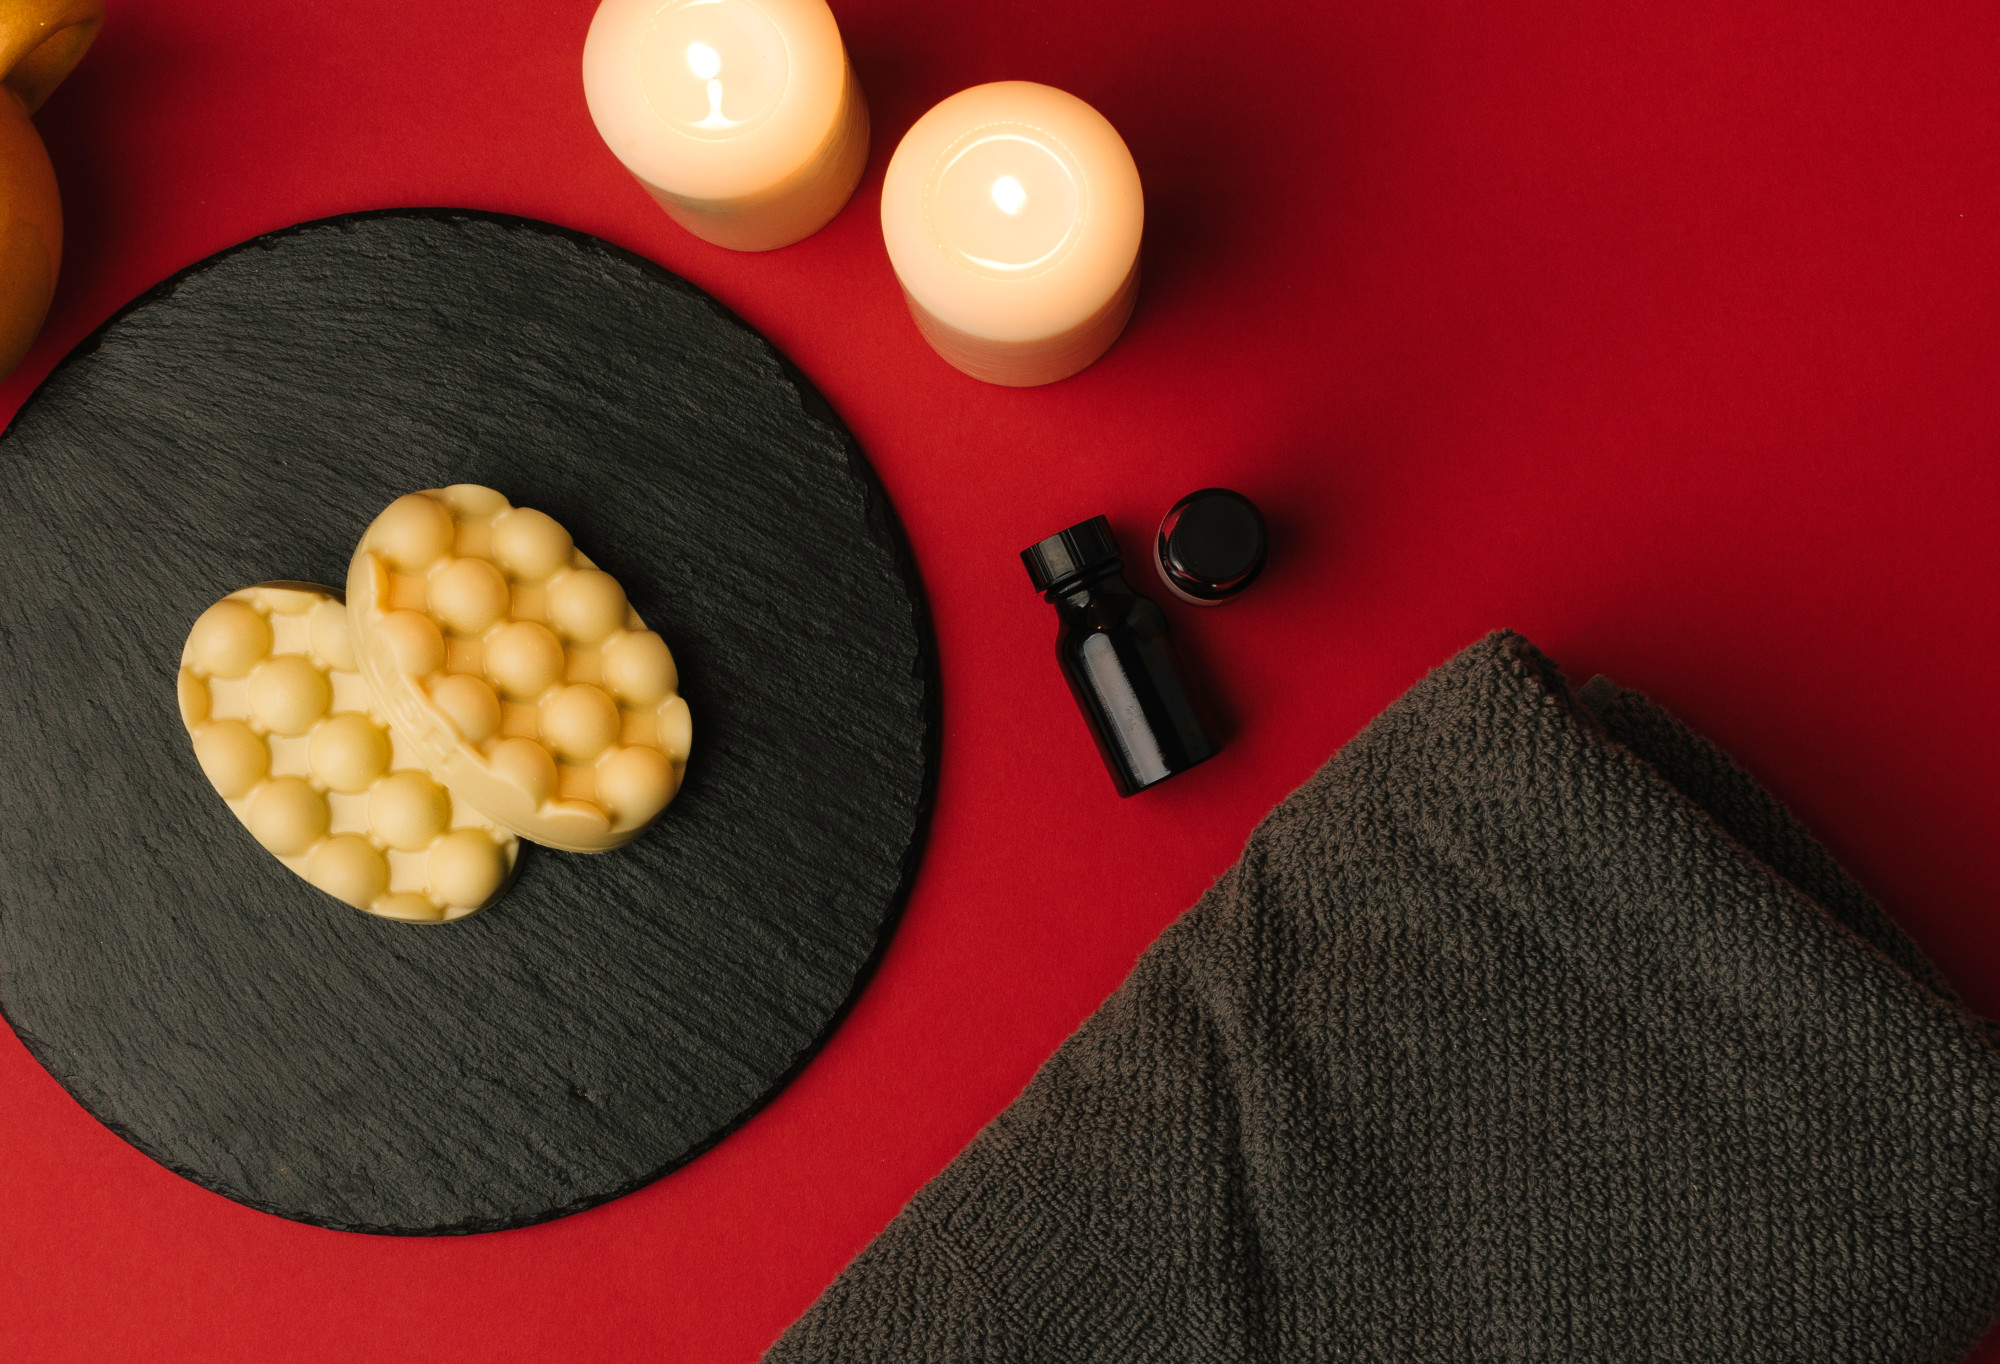 2 yellow, oval shaped Hottie massage bars are presented on a circular slate, accompanied by warm candles, oils and a grey towel.